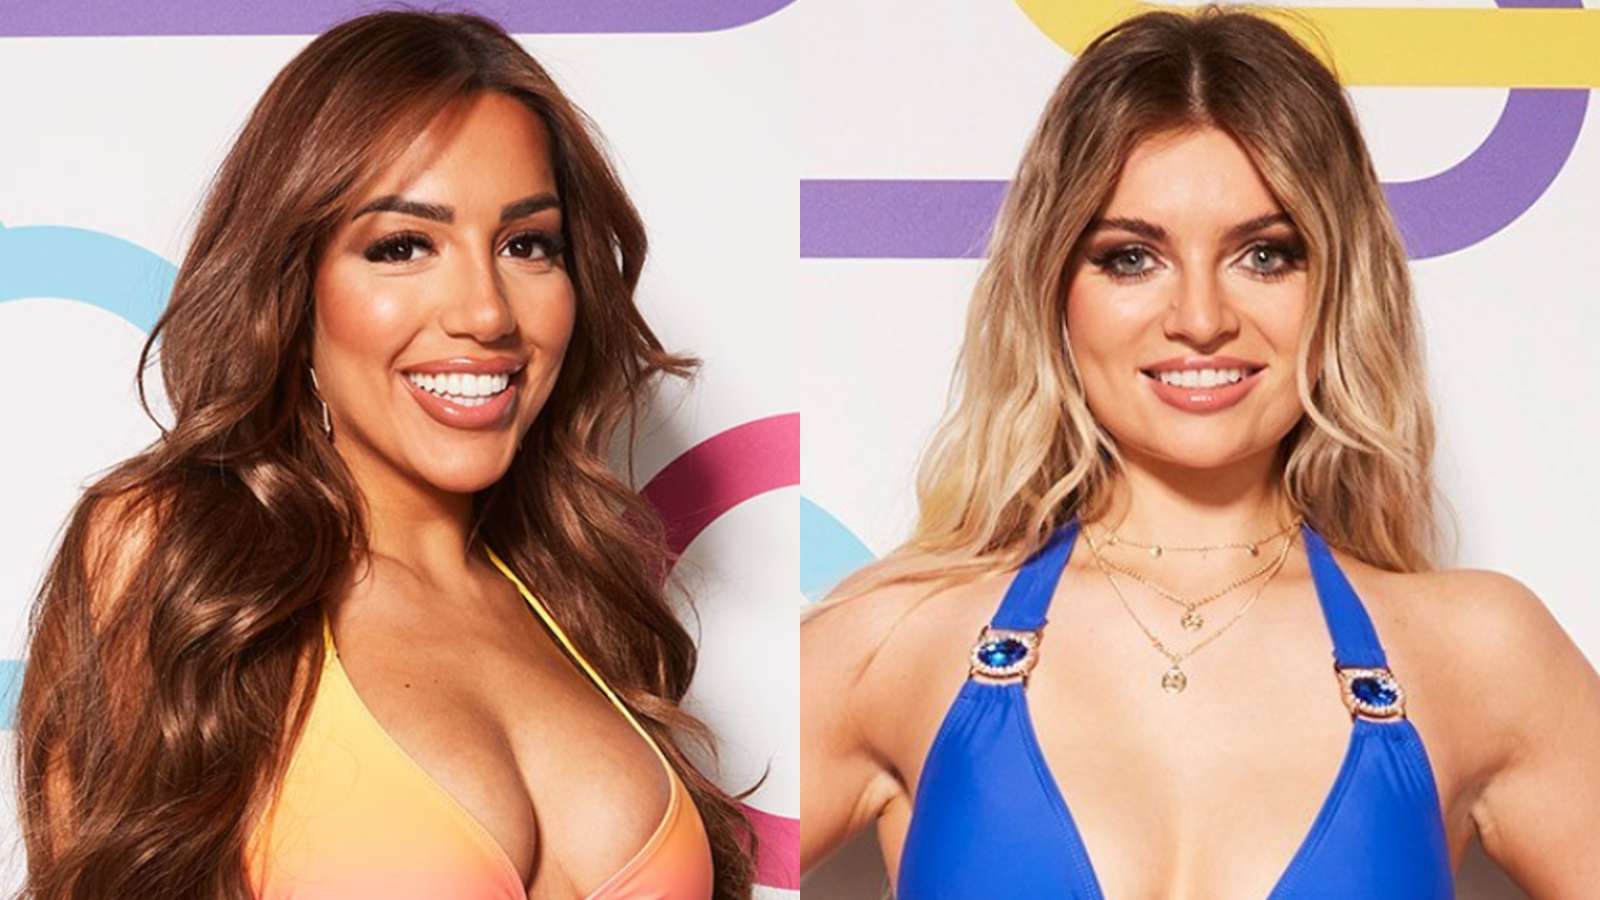 Love Island's Tanyel and Ellie